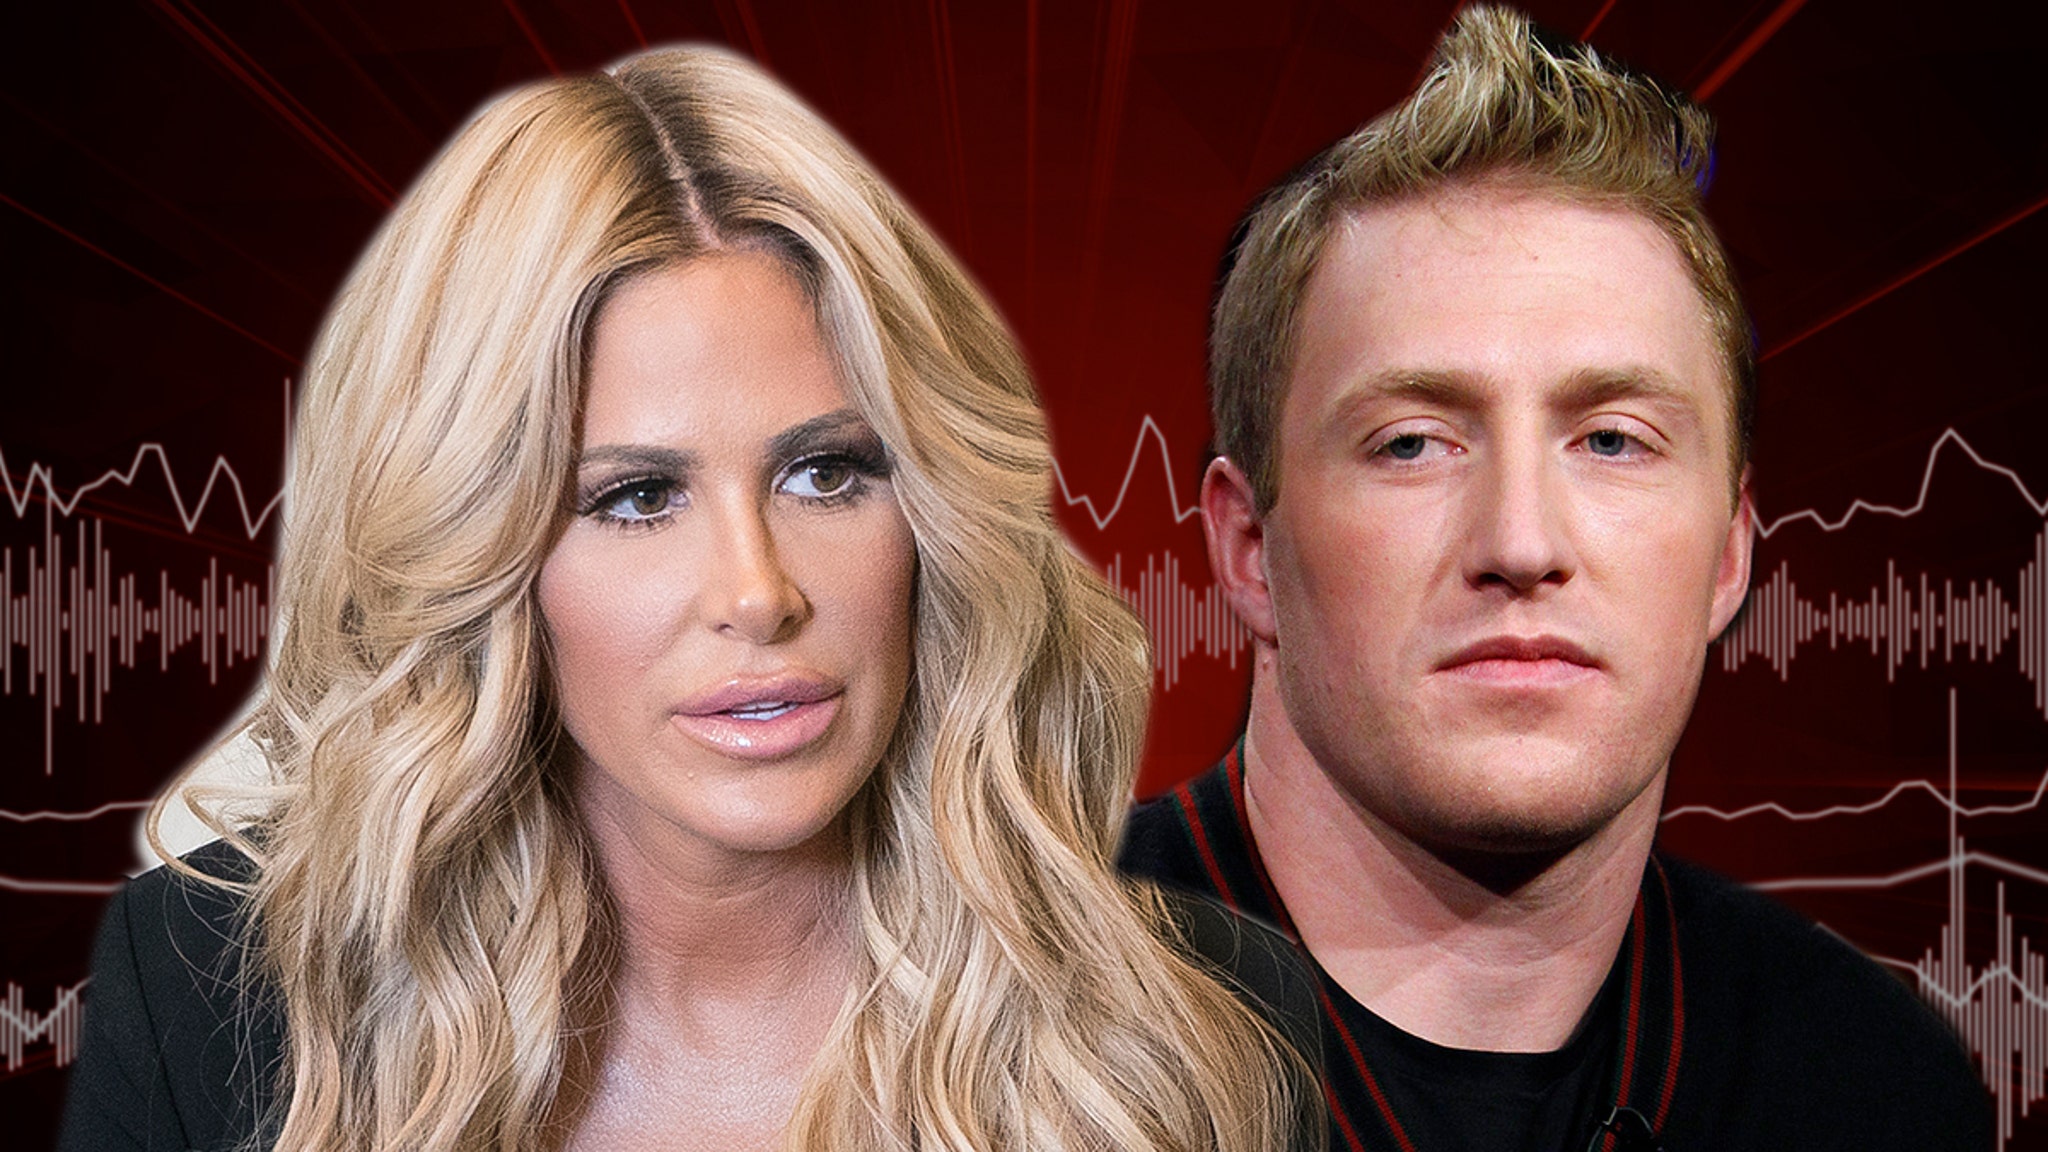 Kim Zolciak Calls 911 on Kroy Biermann Over Alleged Kidnapping Accusation